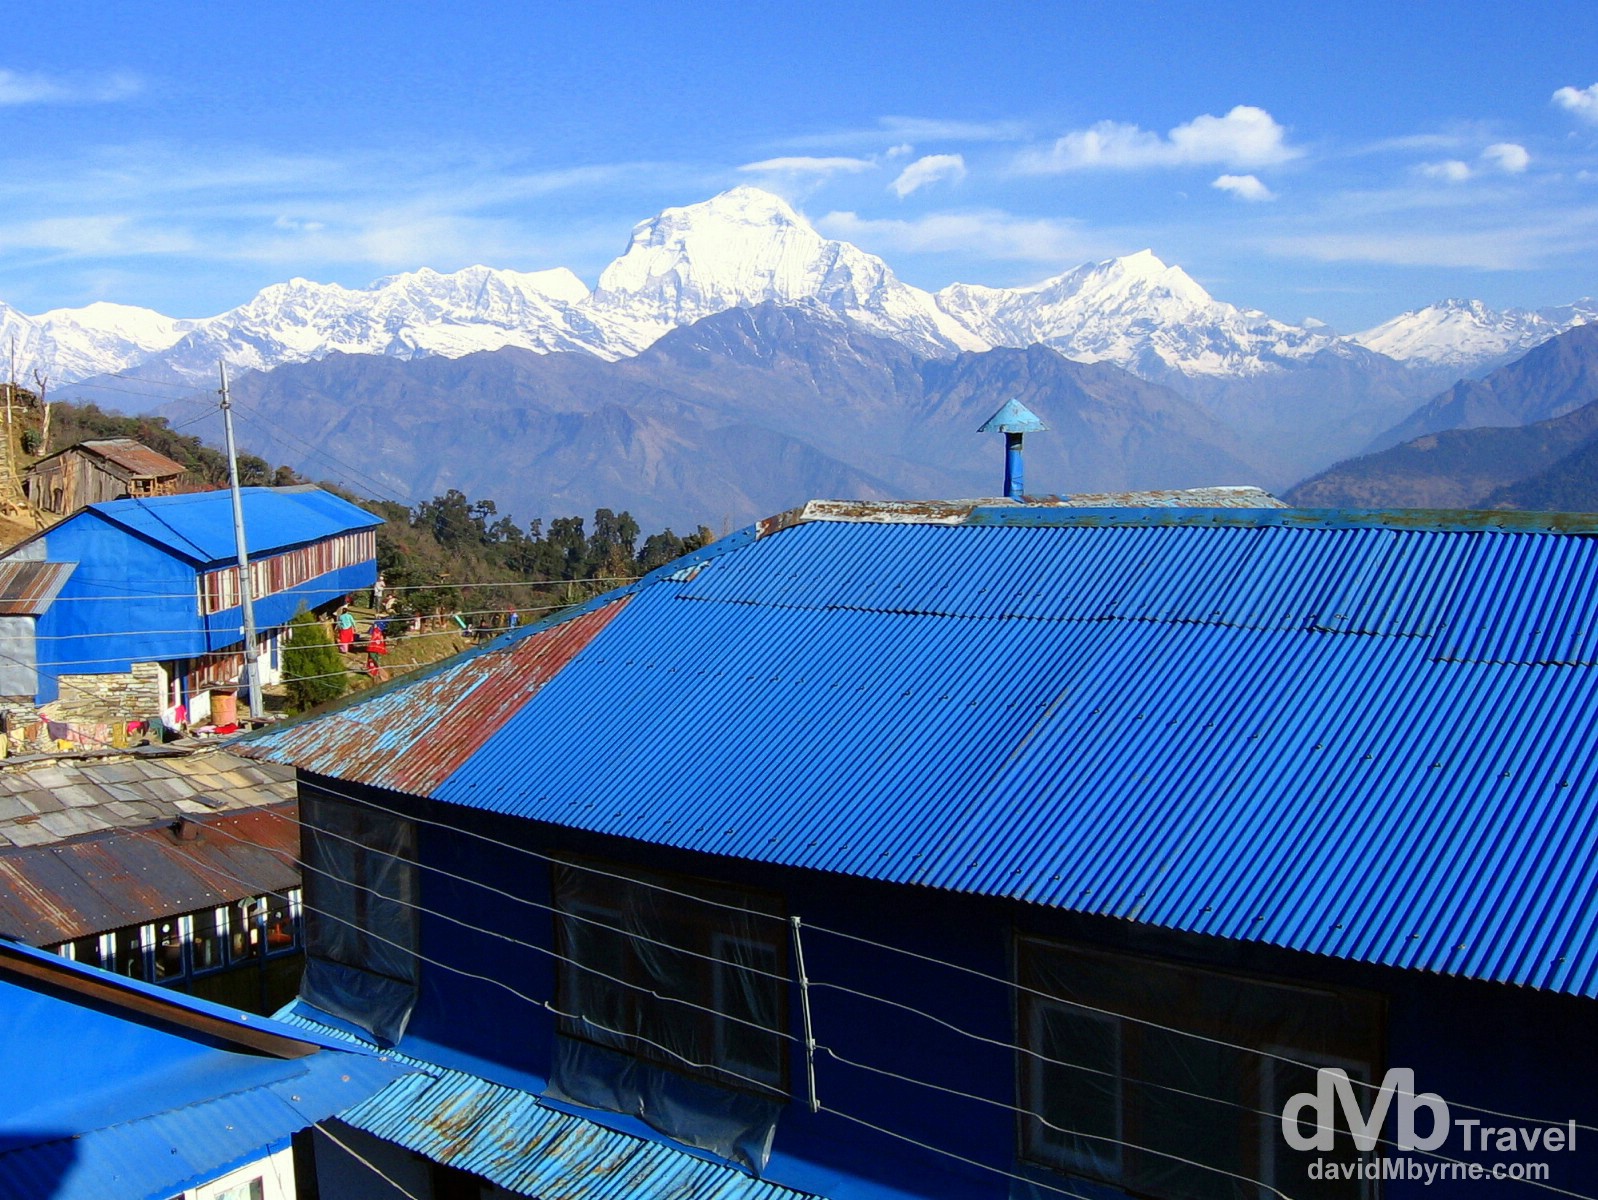 The distinctive blue galvanised roofs of the buildings of Ghorepani village, Nepal. The village sits 1,500ft, 450 metres below Poon Hill and the sight of Dhaulagiri (27,000ft, 8,167m) behind the village makes a spectacular backdrop. Ghorepani Village, Annapurna Conservation Area, Nepal. March 12th 2008.